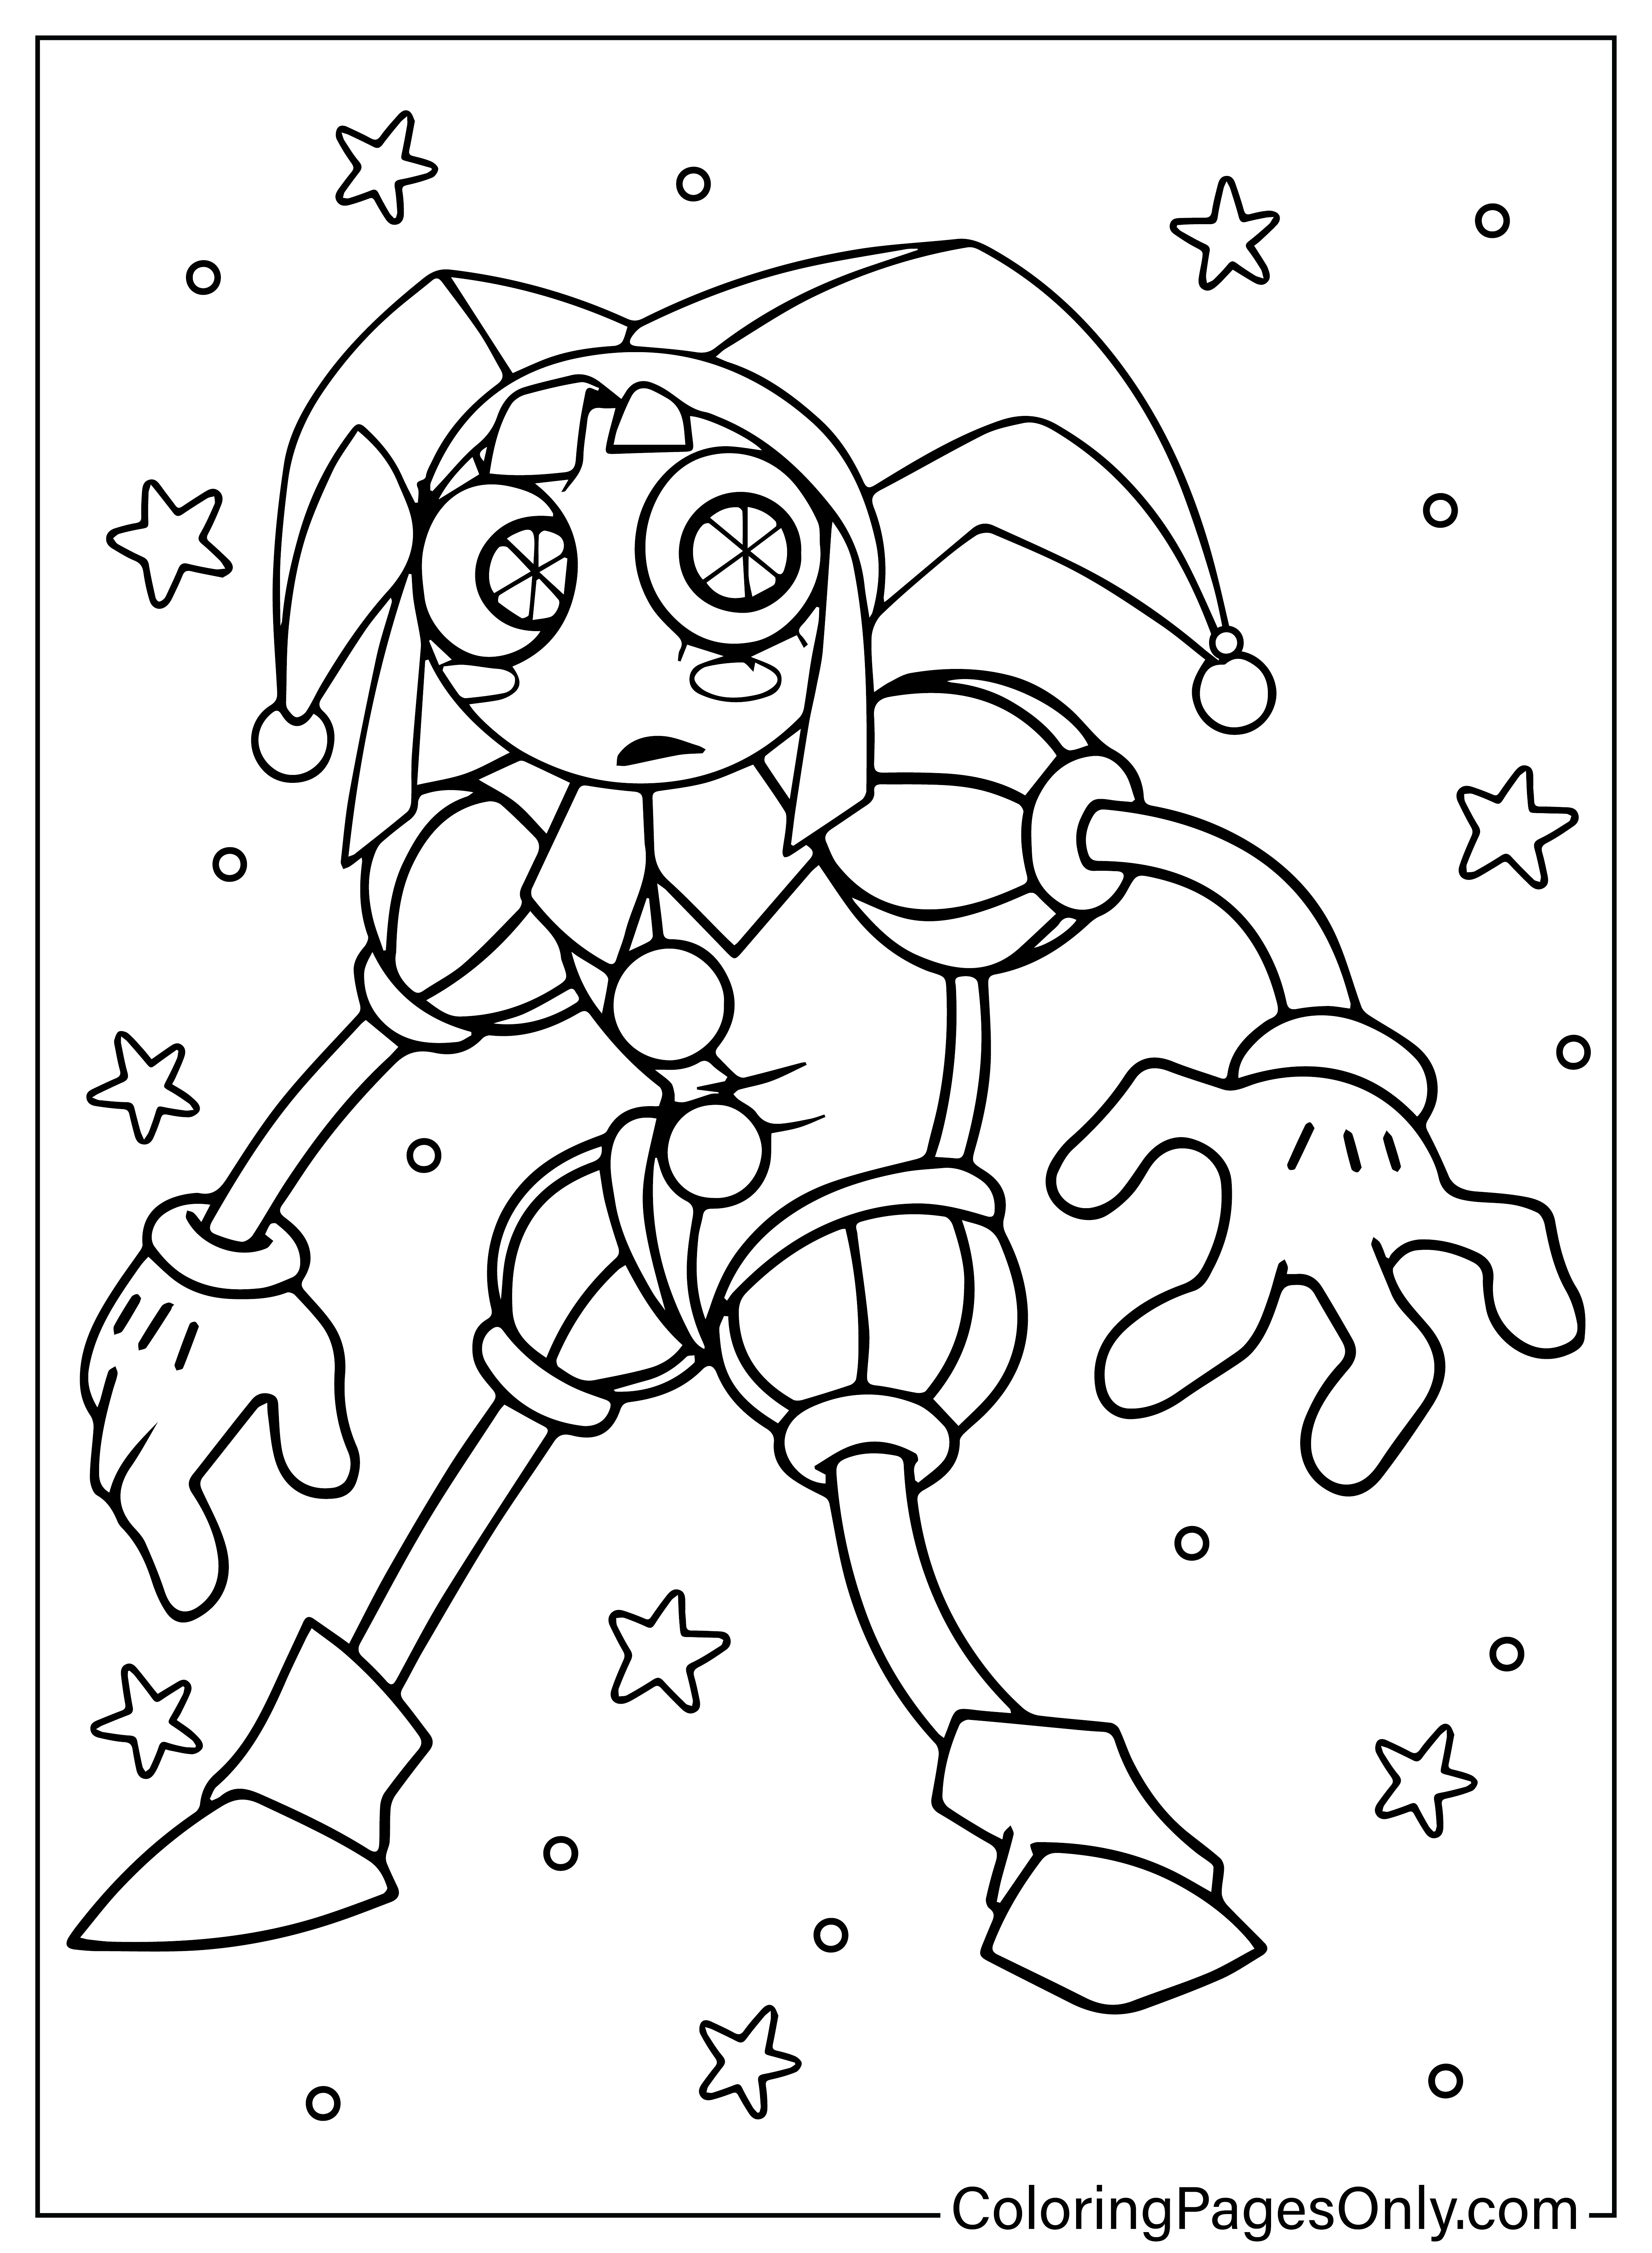 Images Pomni Coloring Page from Pomni